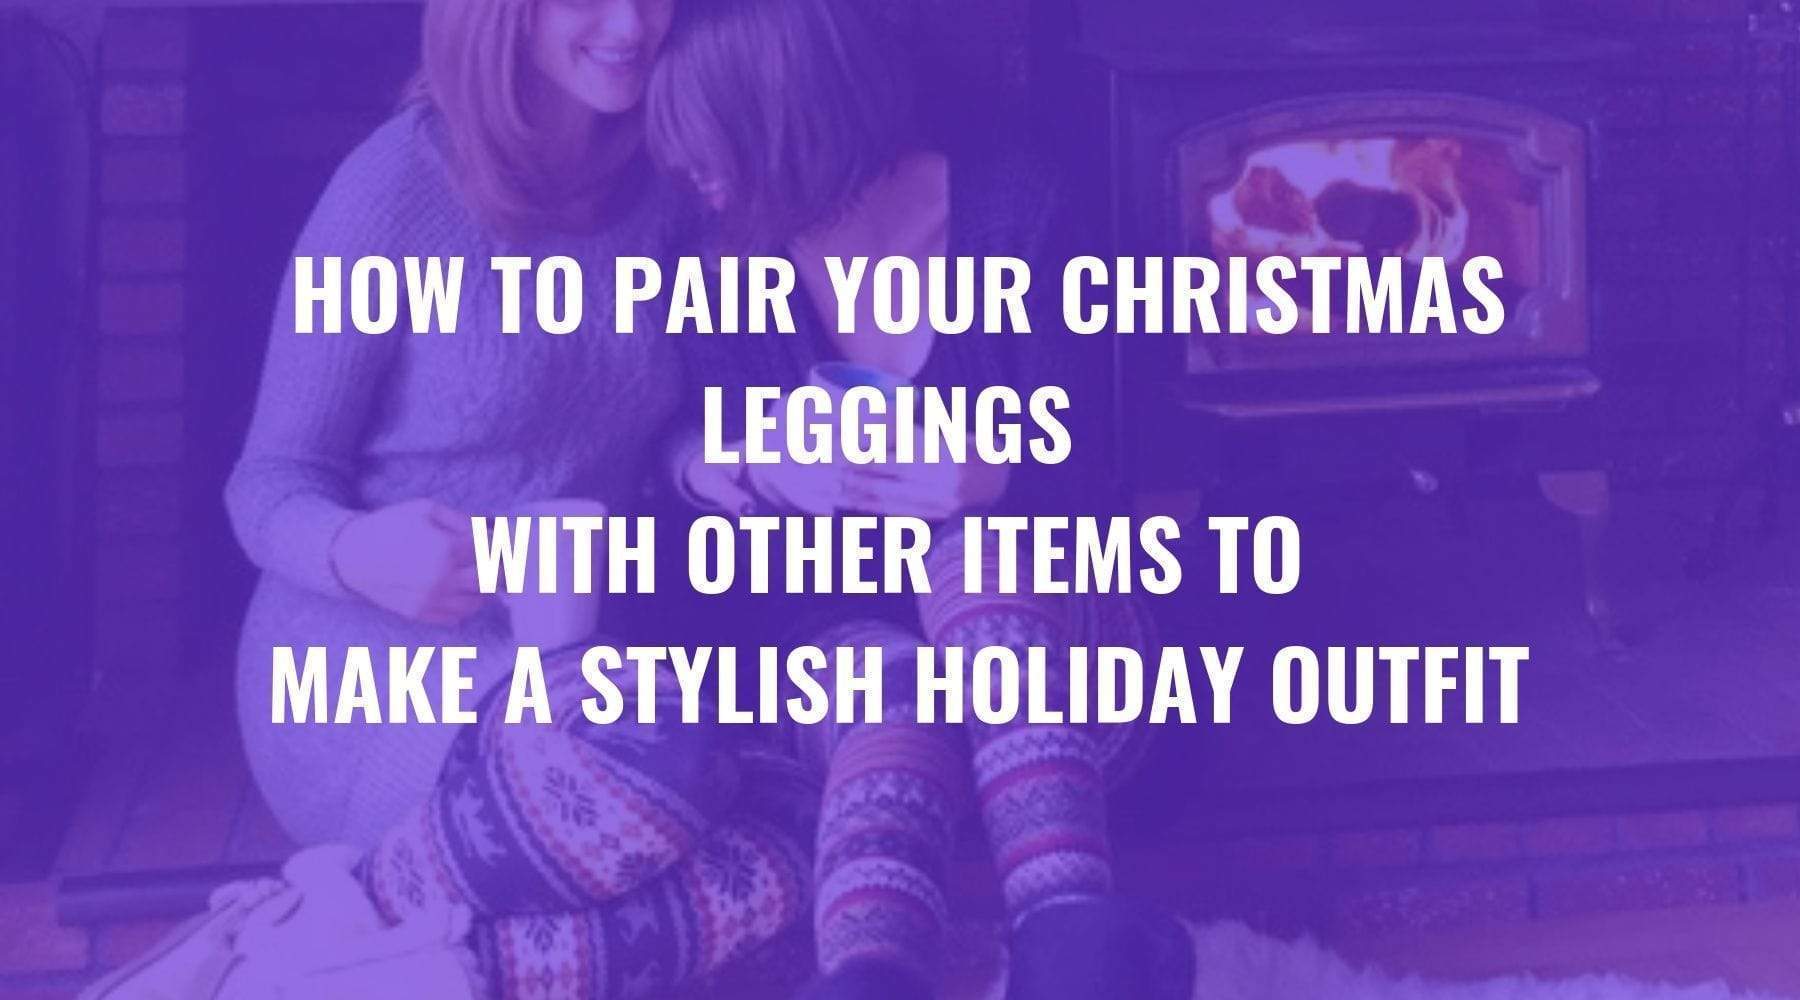 How to Pair Your Christmas Leggings with Other Items to Make a Stylish Holiday Outfit